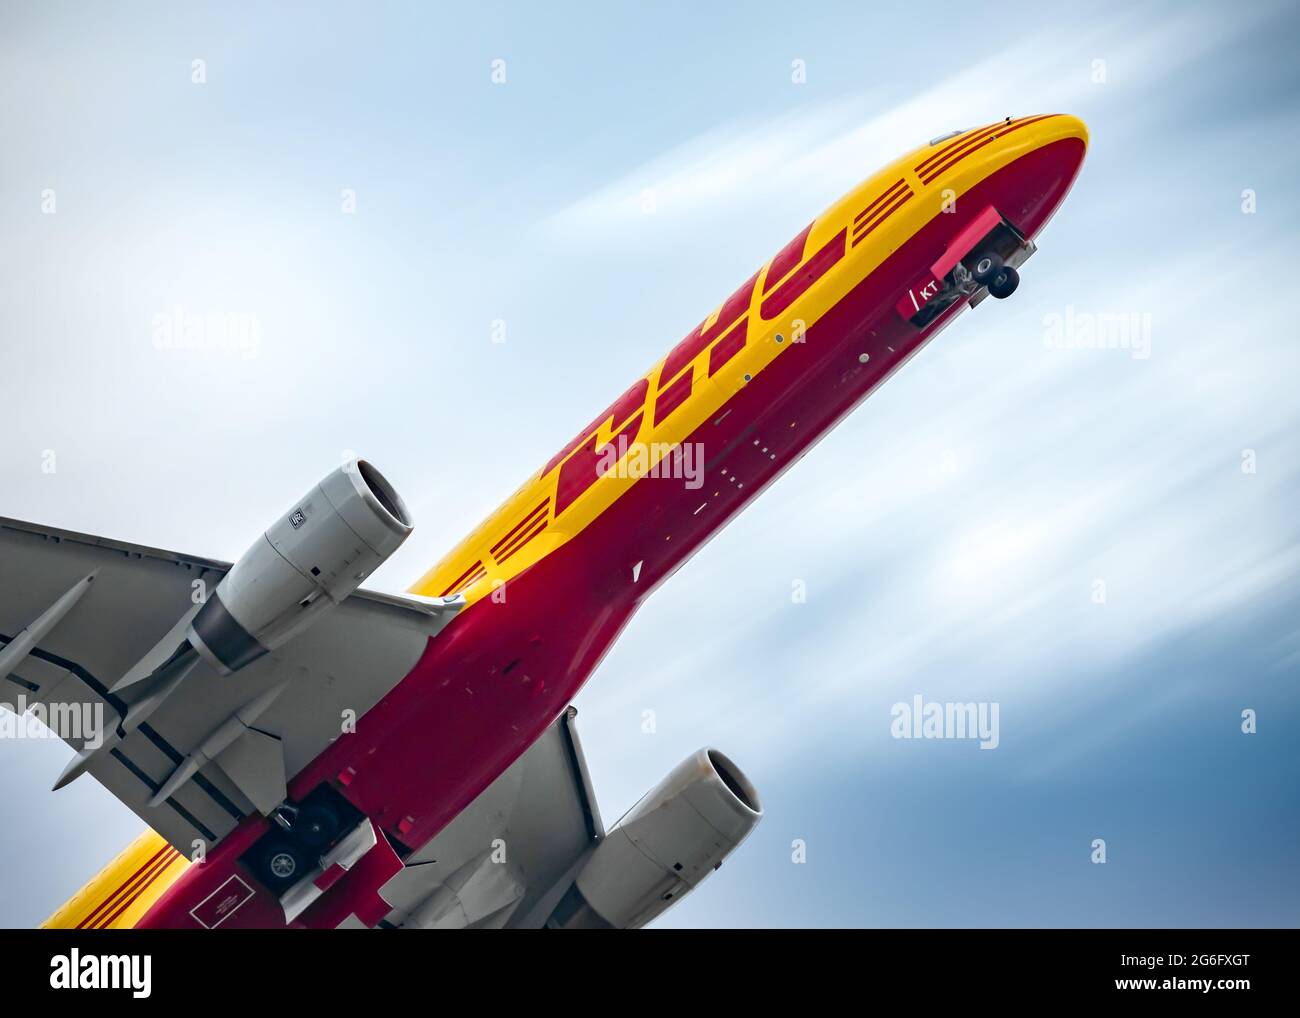 Yellow and Red DHL cargo aircraft jumbo jet taking off towards a blue sky with clouds blurring from motion. Wheels down after just lifting off runway. Stock Photo